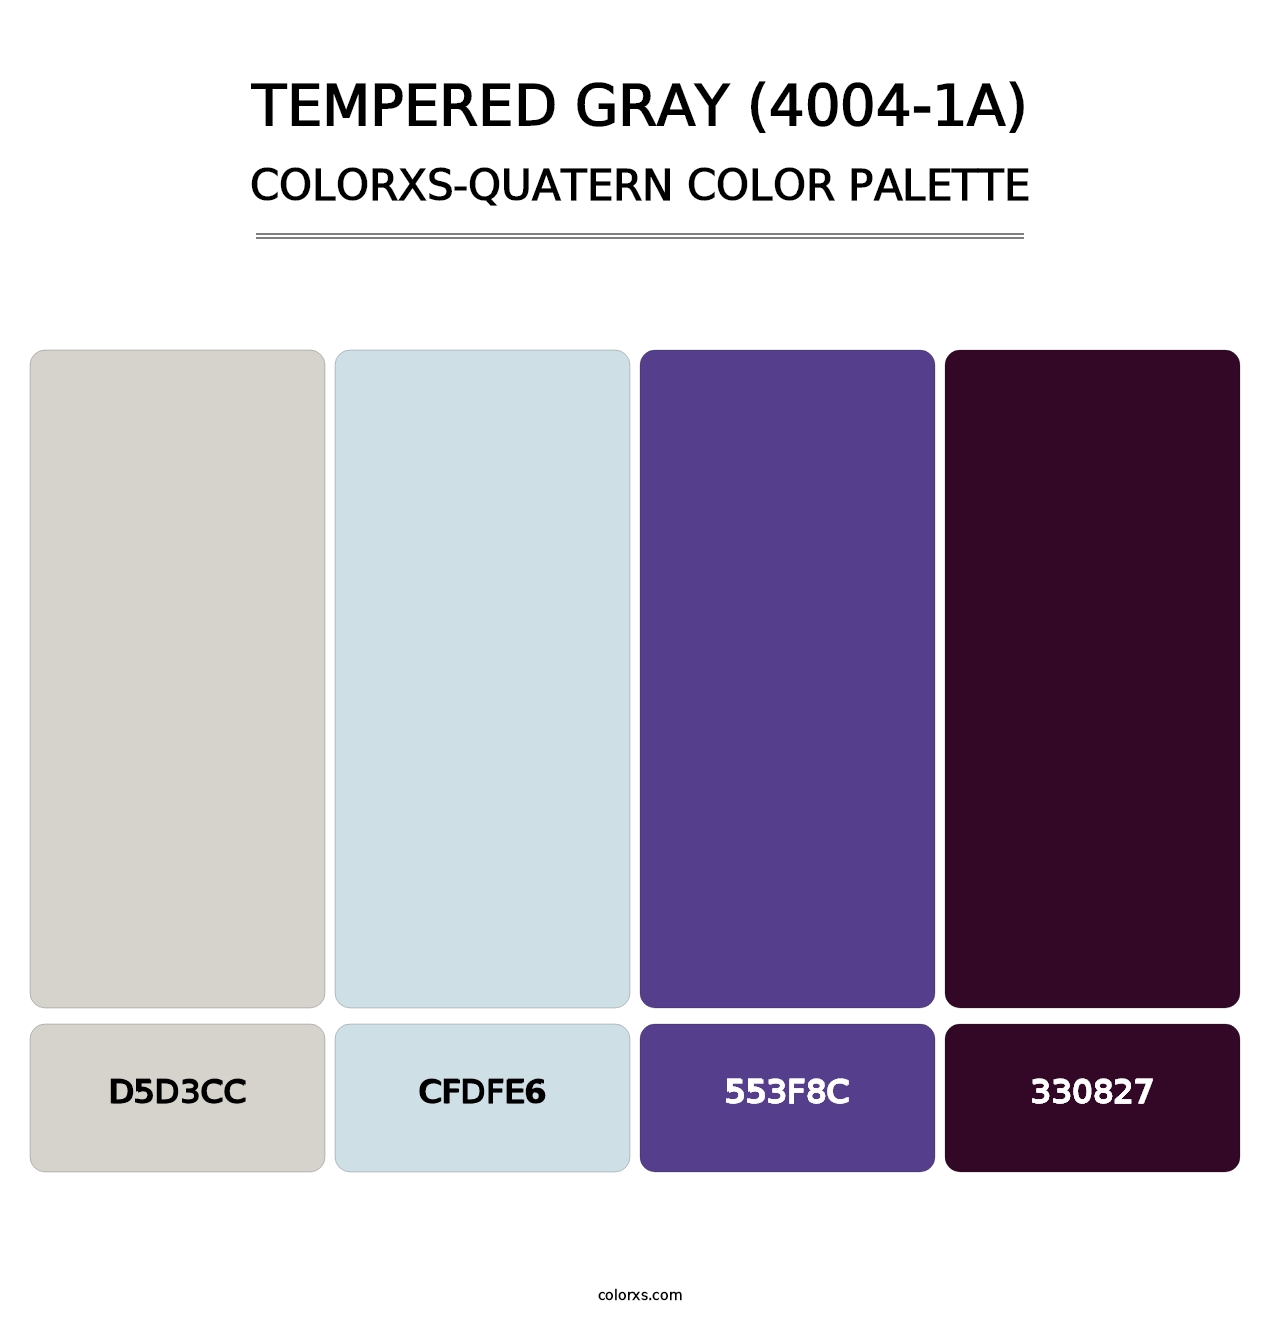 Tempered Gray (4004-1A) - Colorxs Quatern Palette